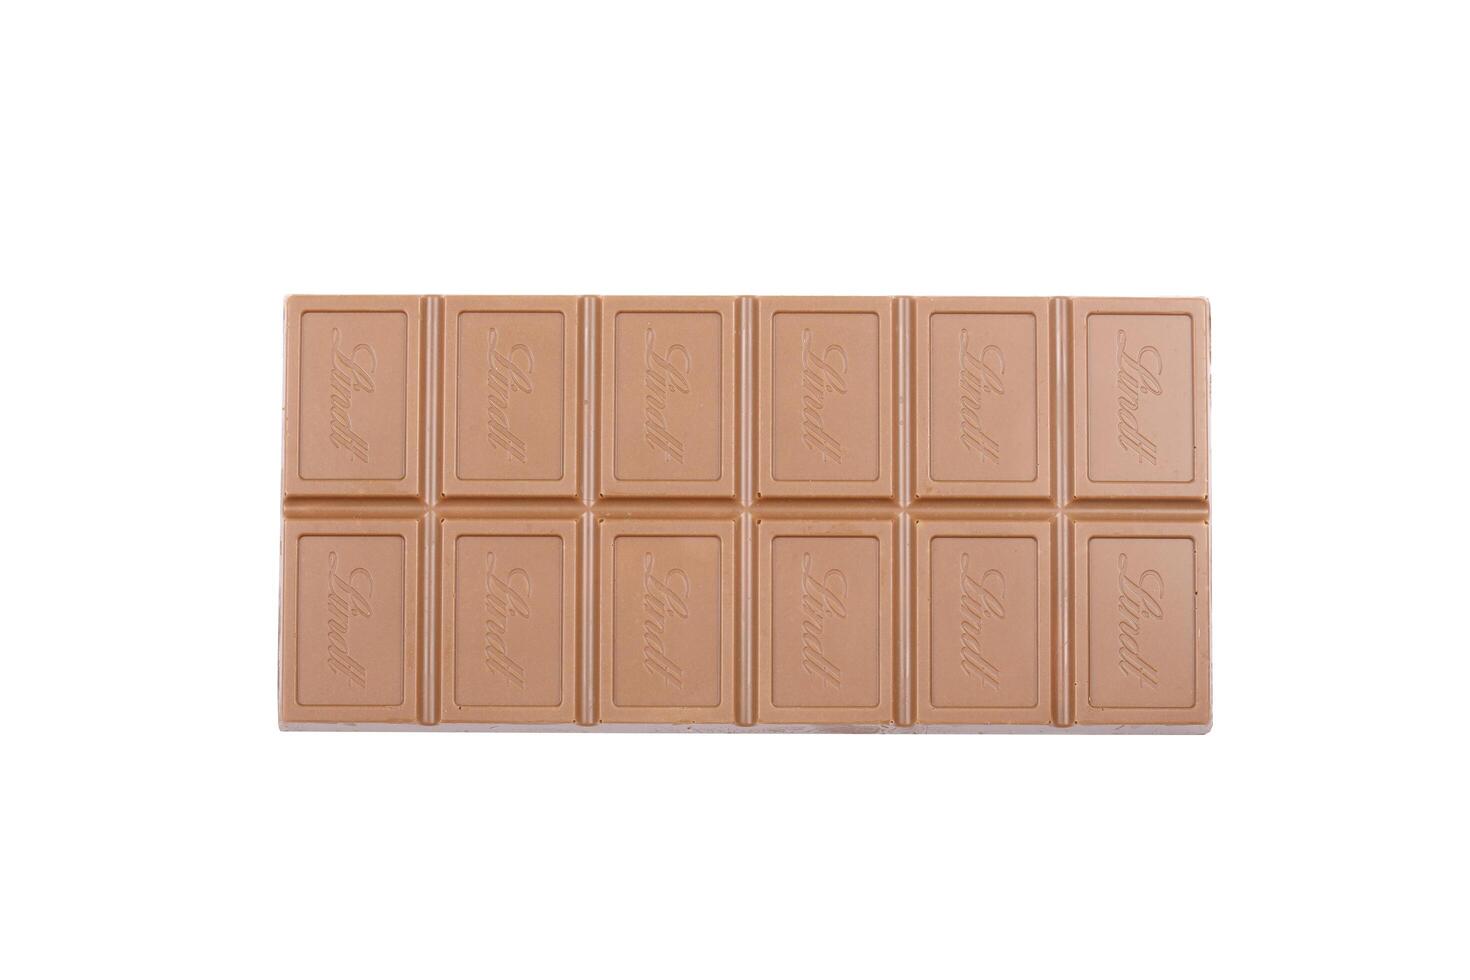 KYIV, UKRAINE - MAY 4, 2022 Lindt Swiss luxury brand chocolate brown tablets with embossed logo photo